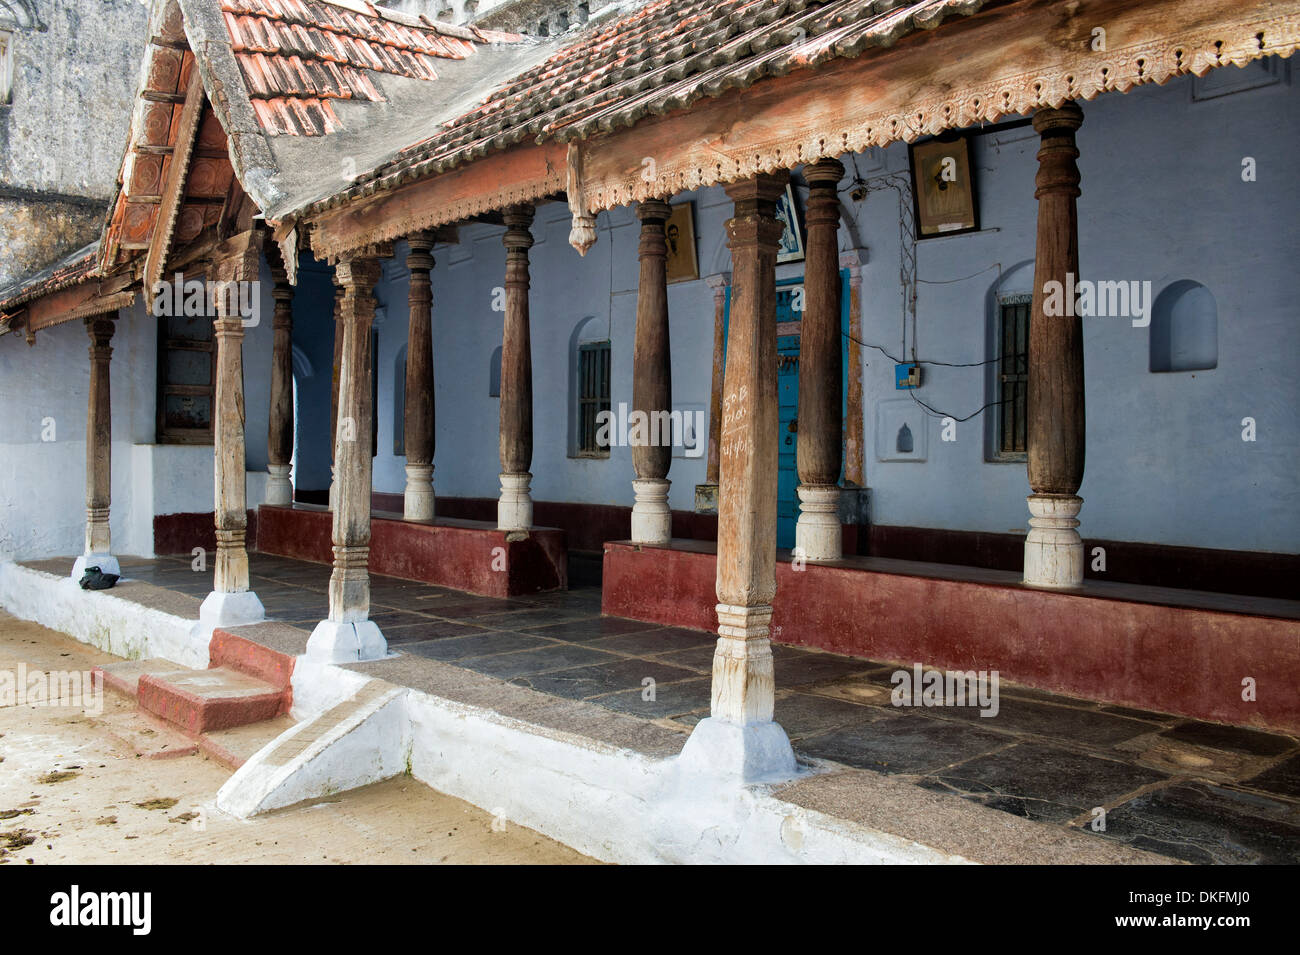 Traditional south indian house with large wooden pillared veranda. Andhra Pradesh, India Stock Photo